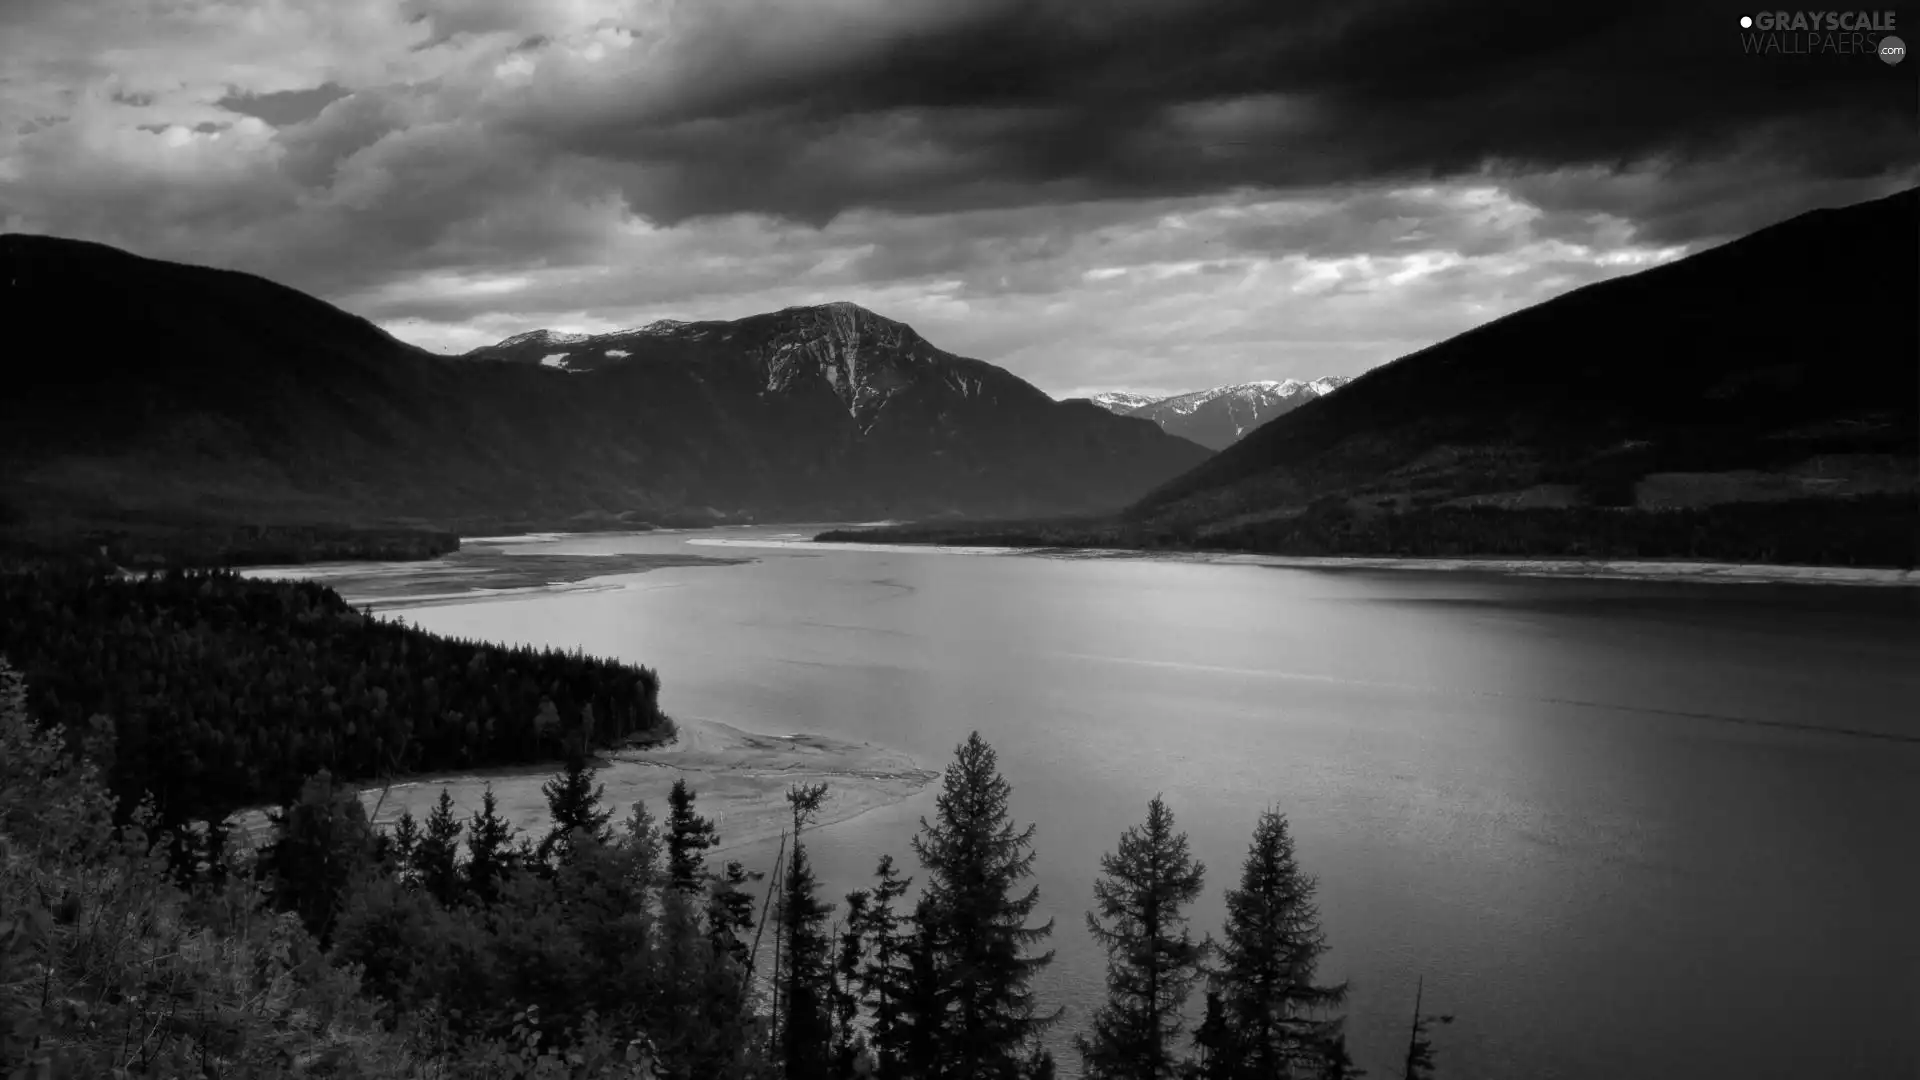 lake, clouds, Canada, Mountains